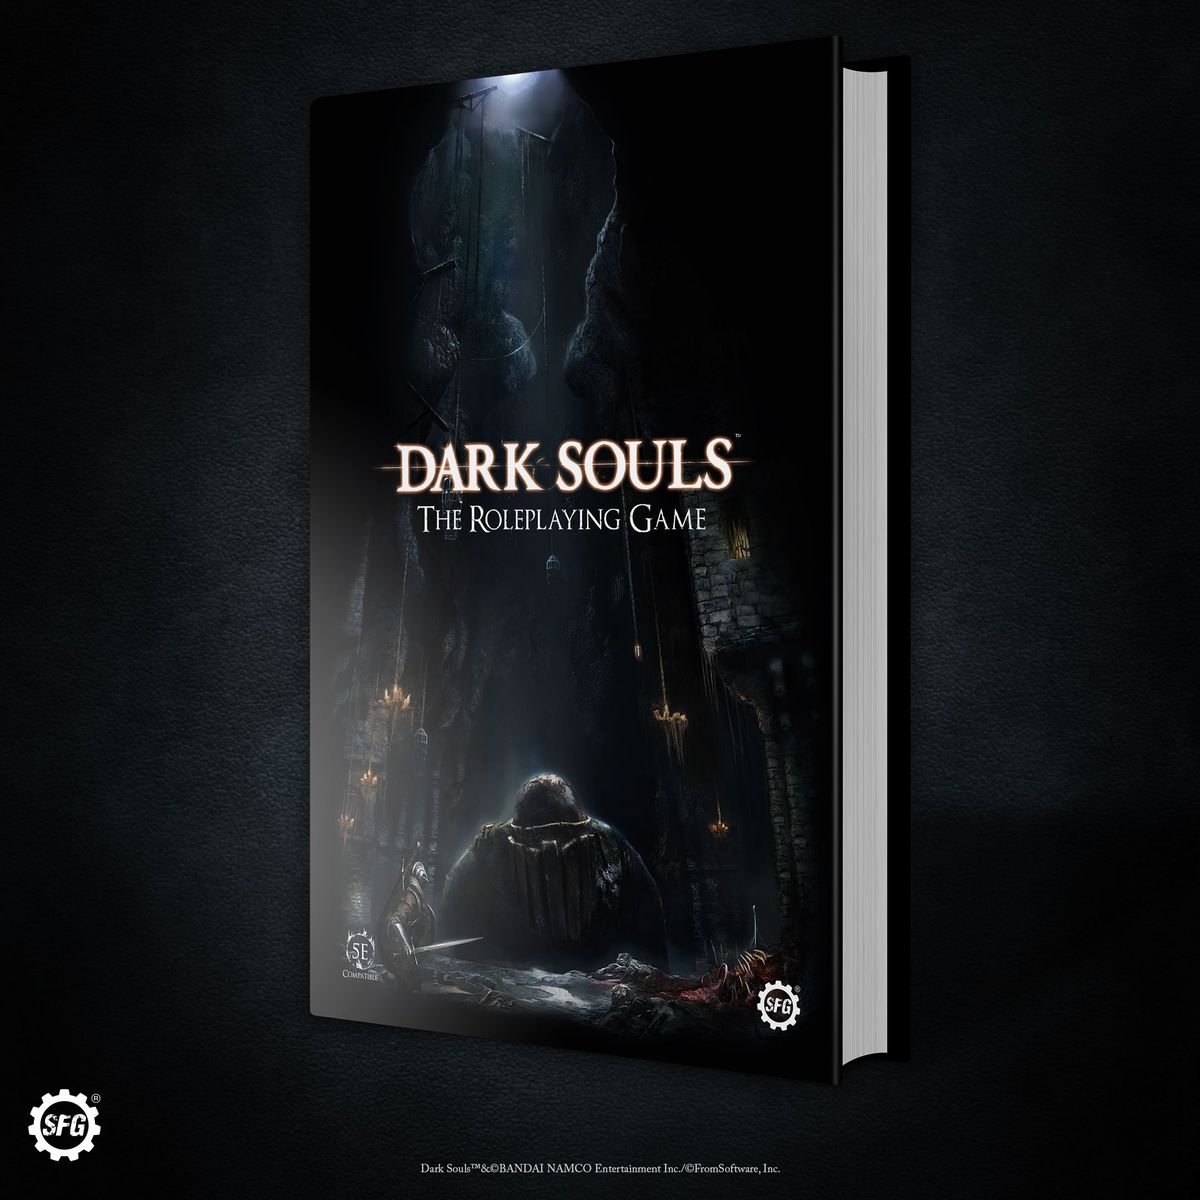 A render of the cover art for Dark Souls: The Roleplaying Game shows a knight moving into a darkened shrine. A bonfire glows to one side.